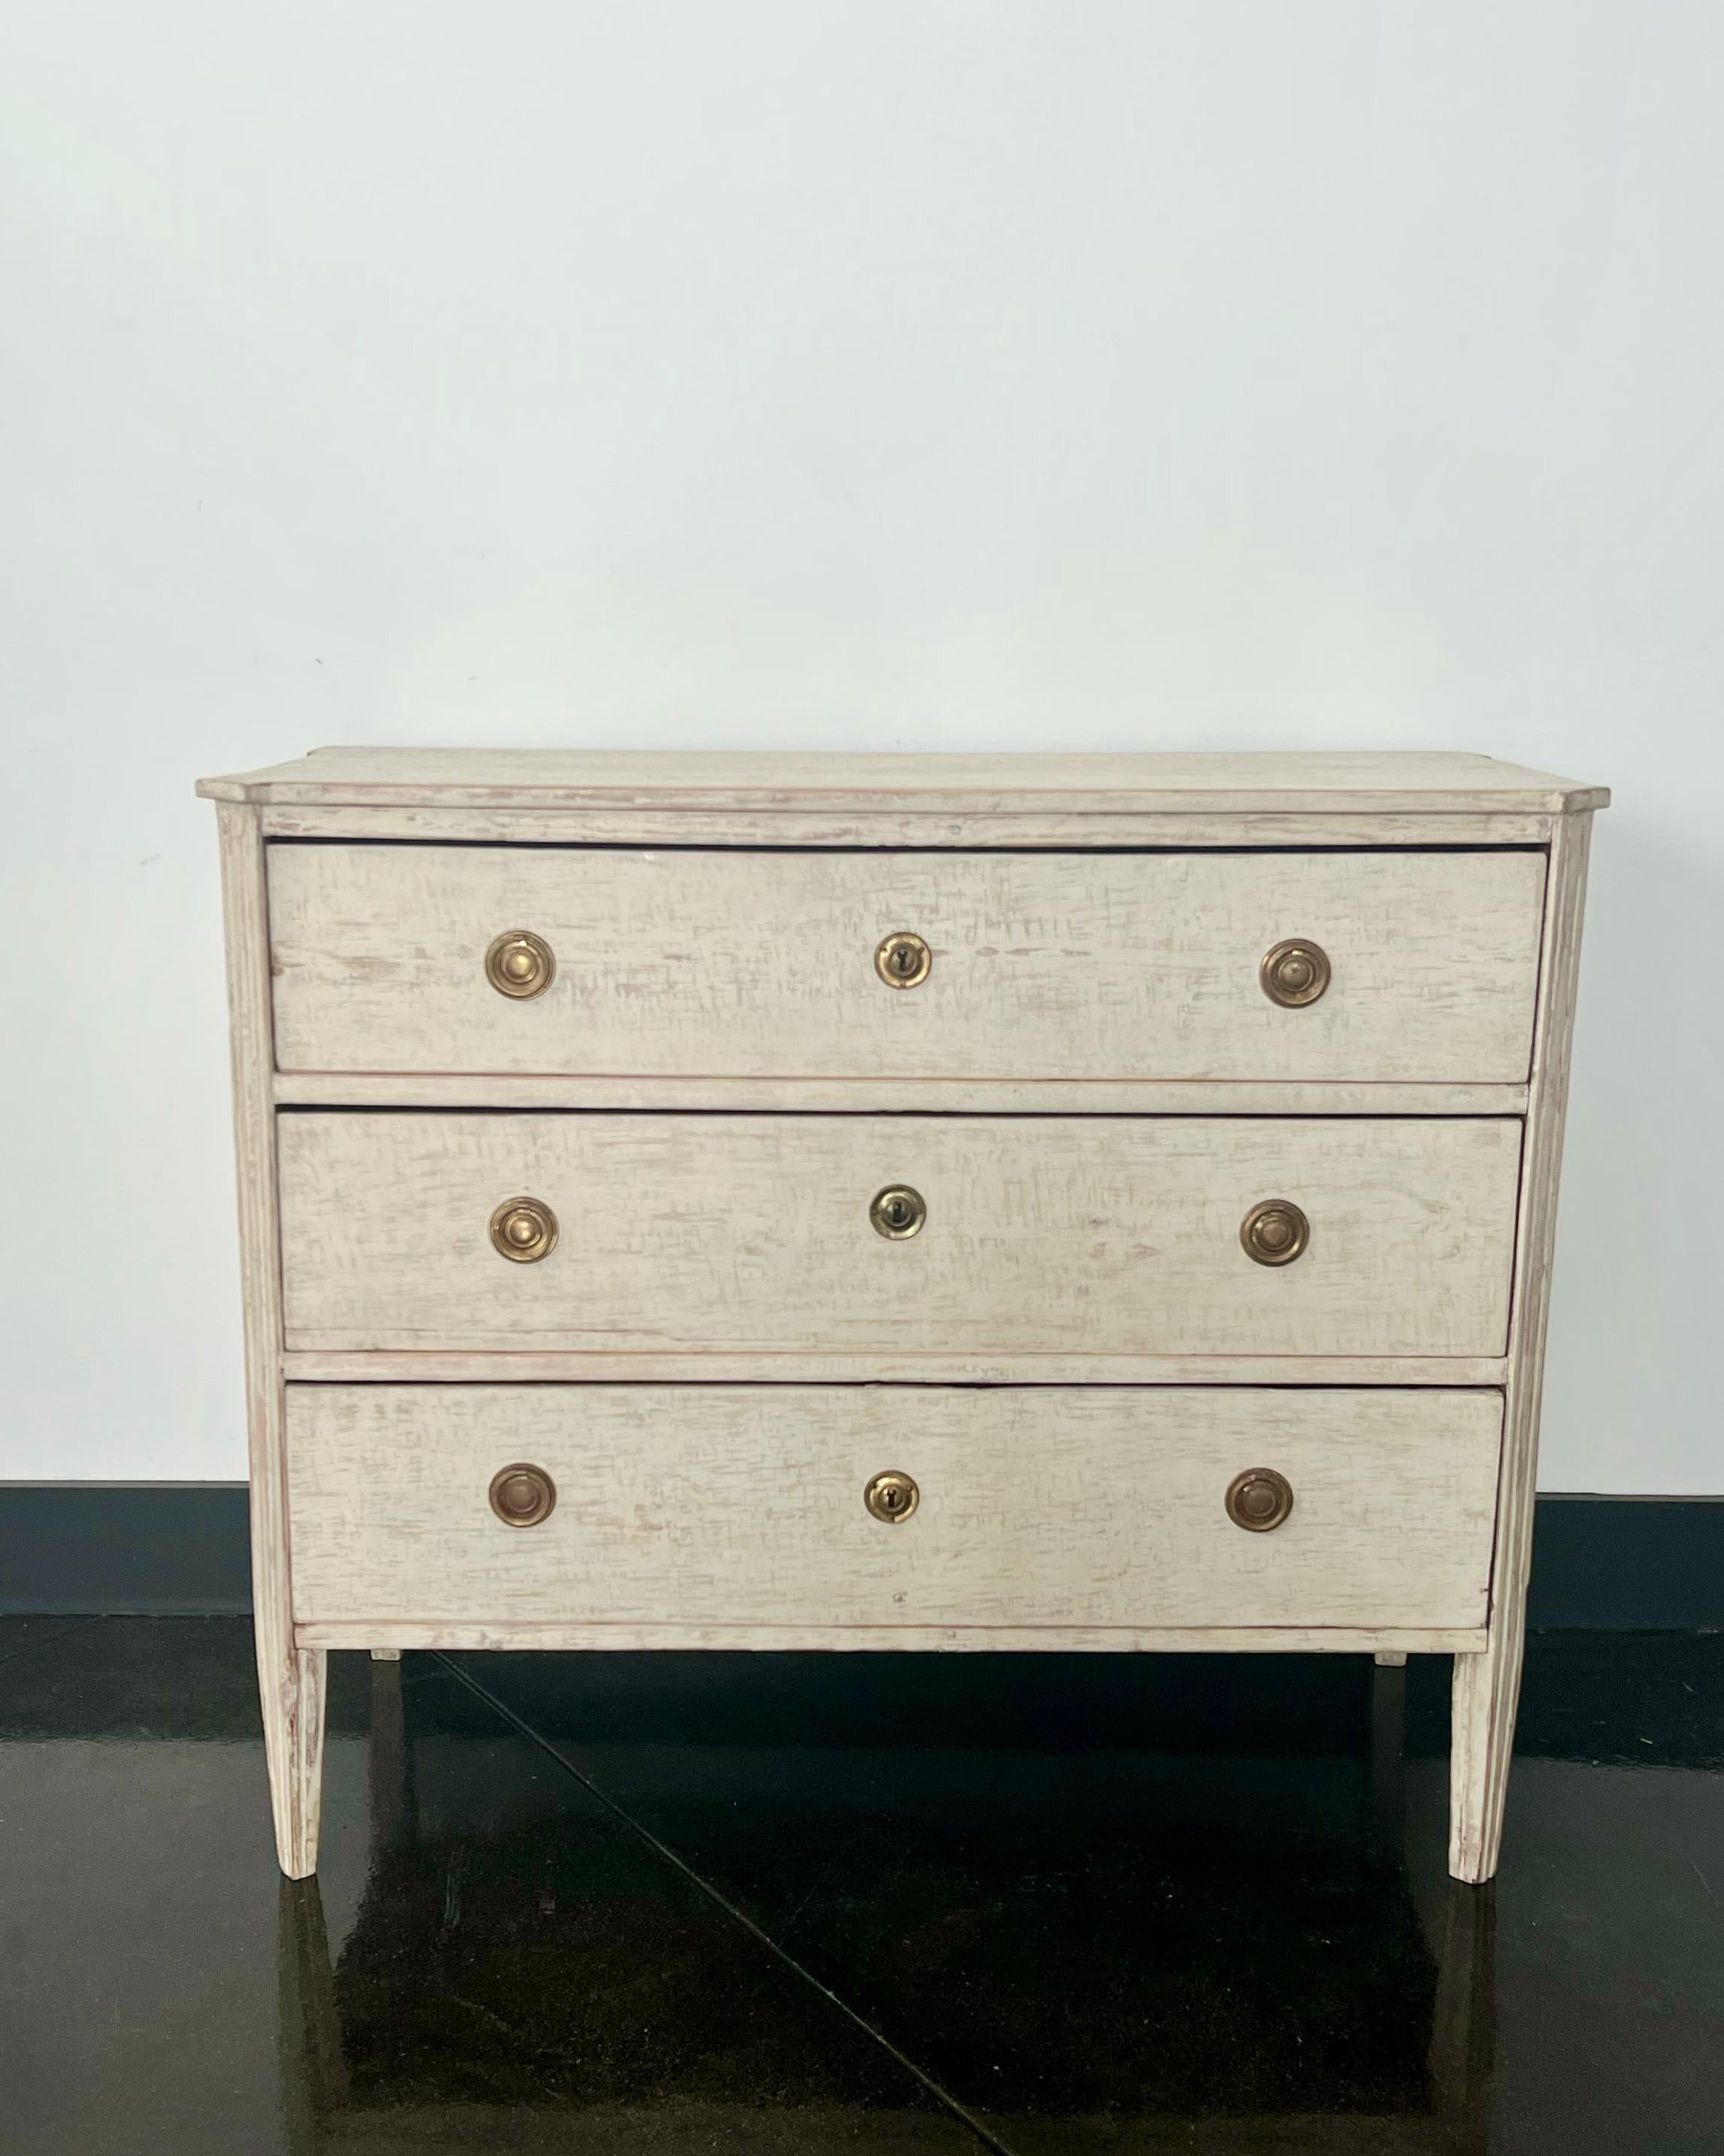 19th Century Swedish Gustavian style chest of drawers with three drawers, canted and reeded corners, handsome bronze hardwares and tapering square legs under the shaped wooden top in most of its original finish.

